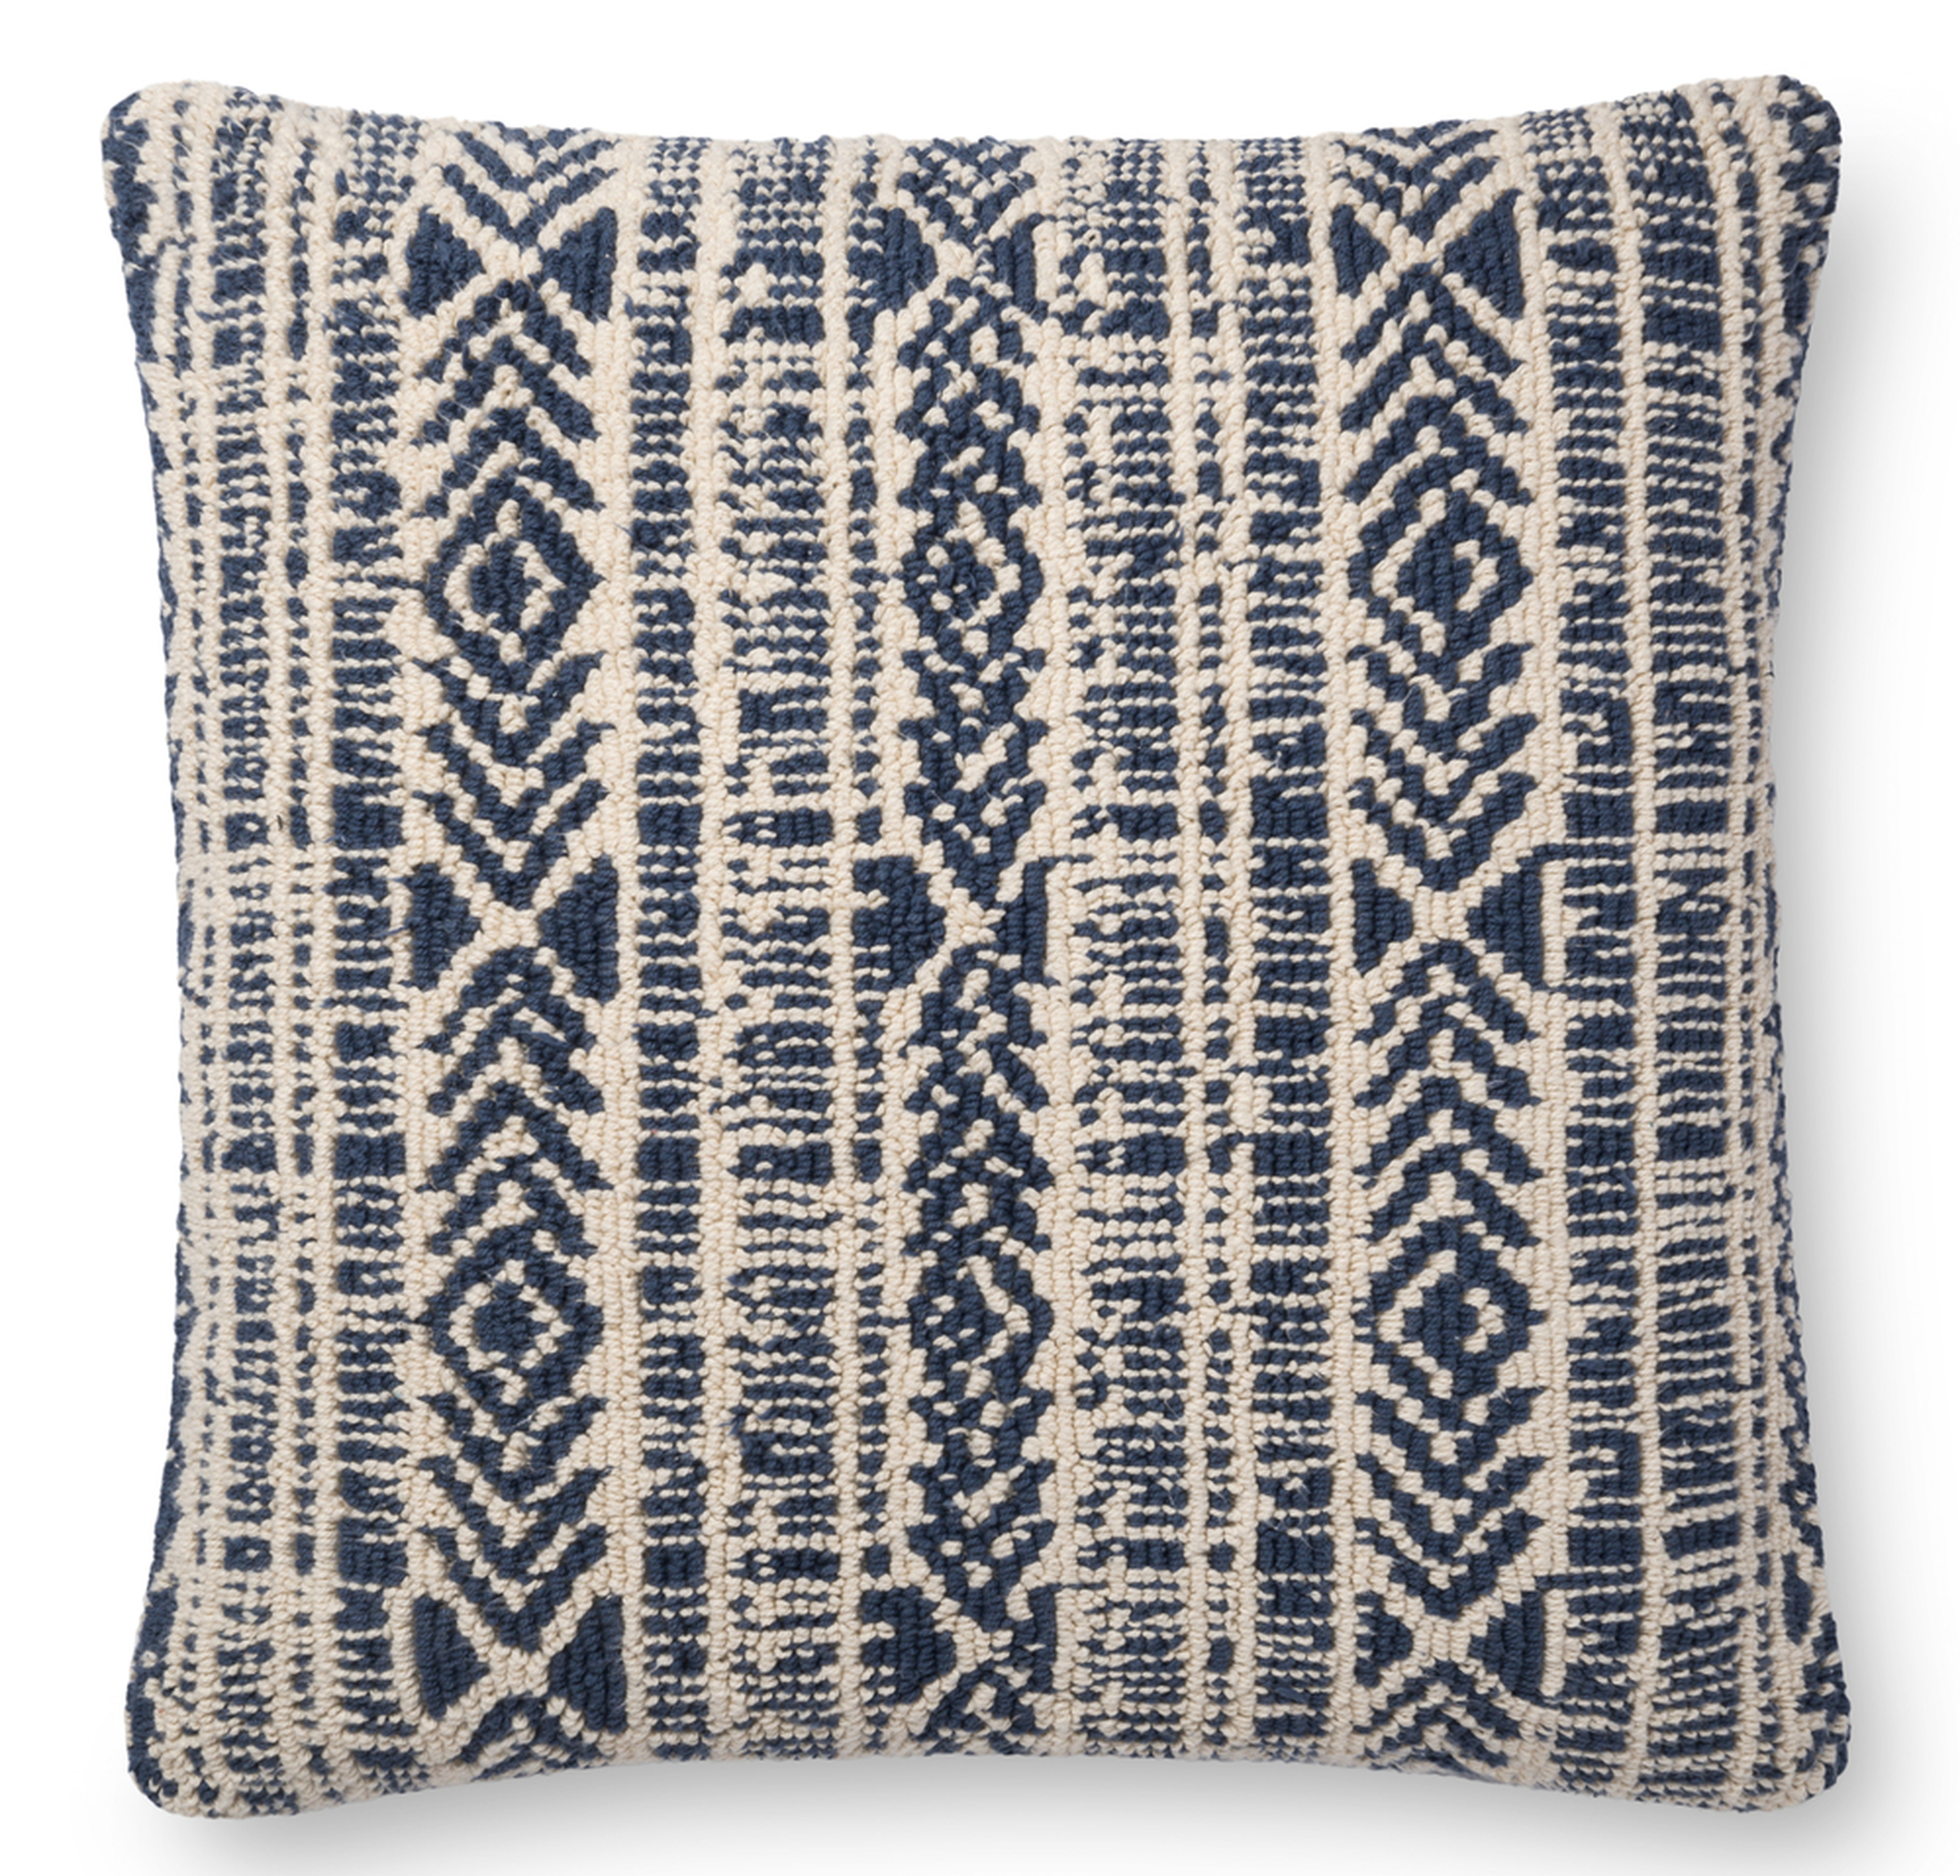 IONE PILLOW, NAVY AND IVORY - Lulu and Georgia